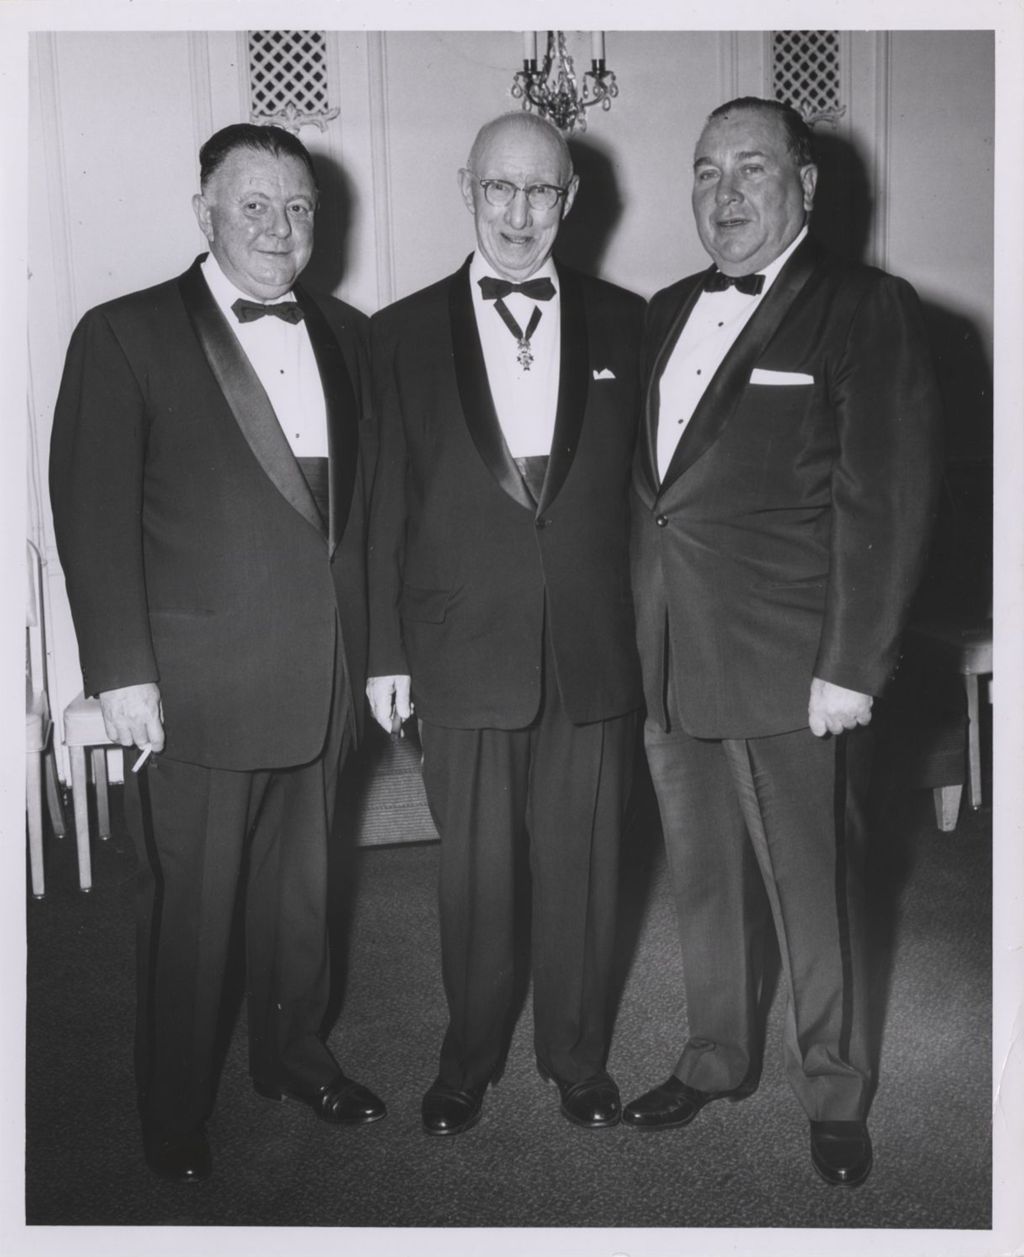 Miniature of Richard J. Daley and two men in tuxedos